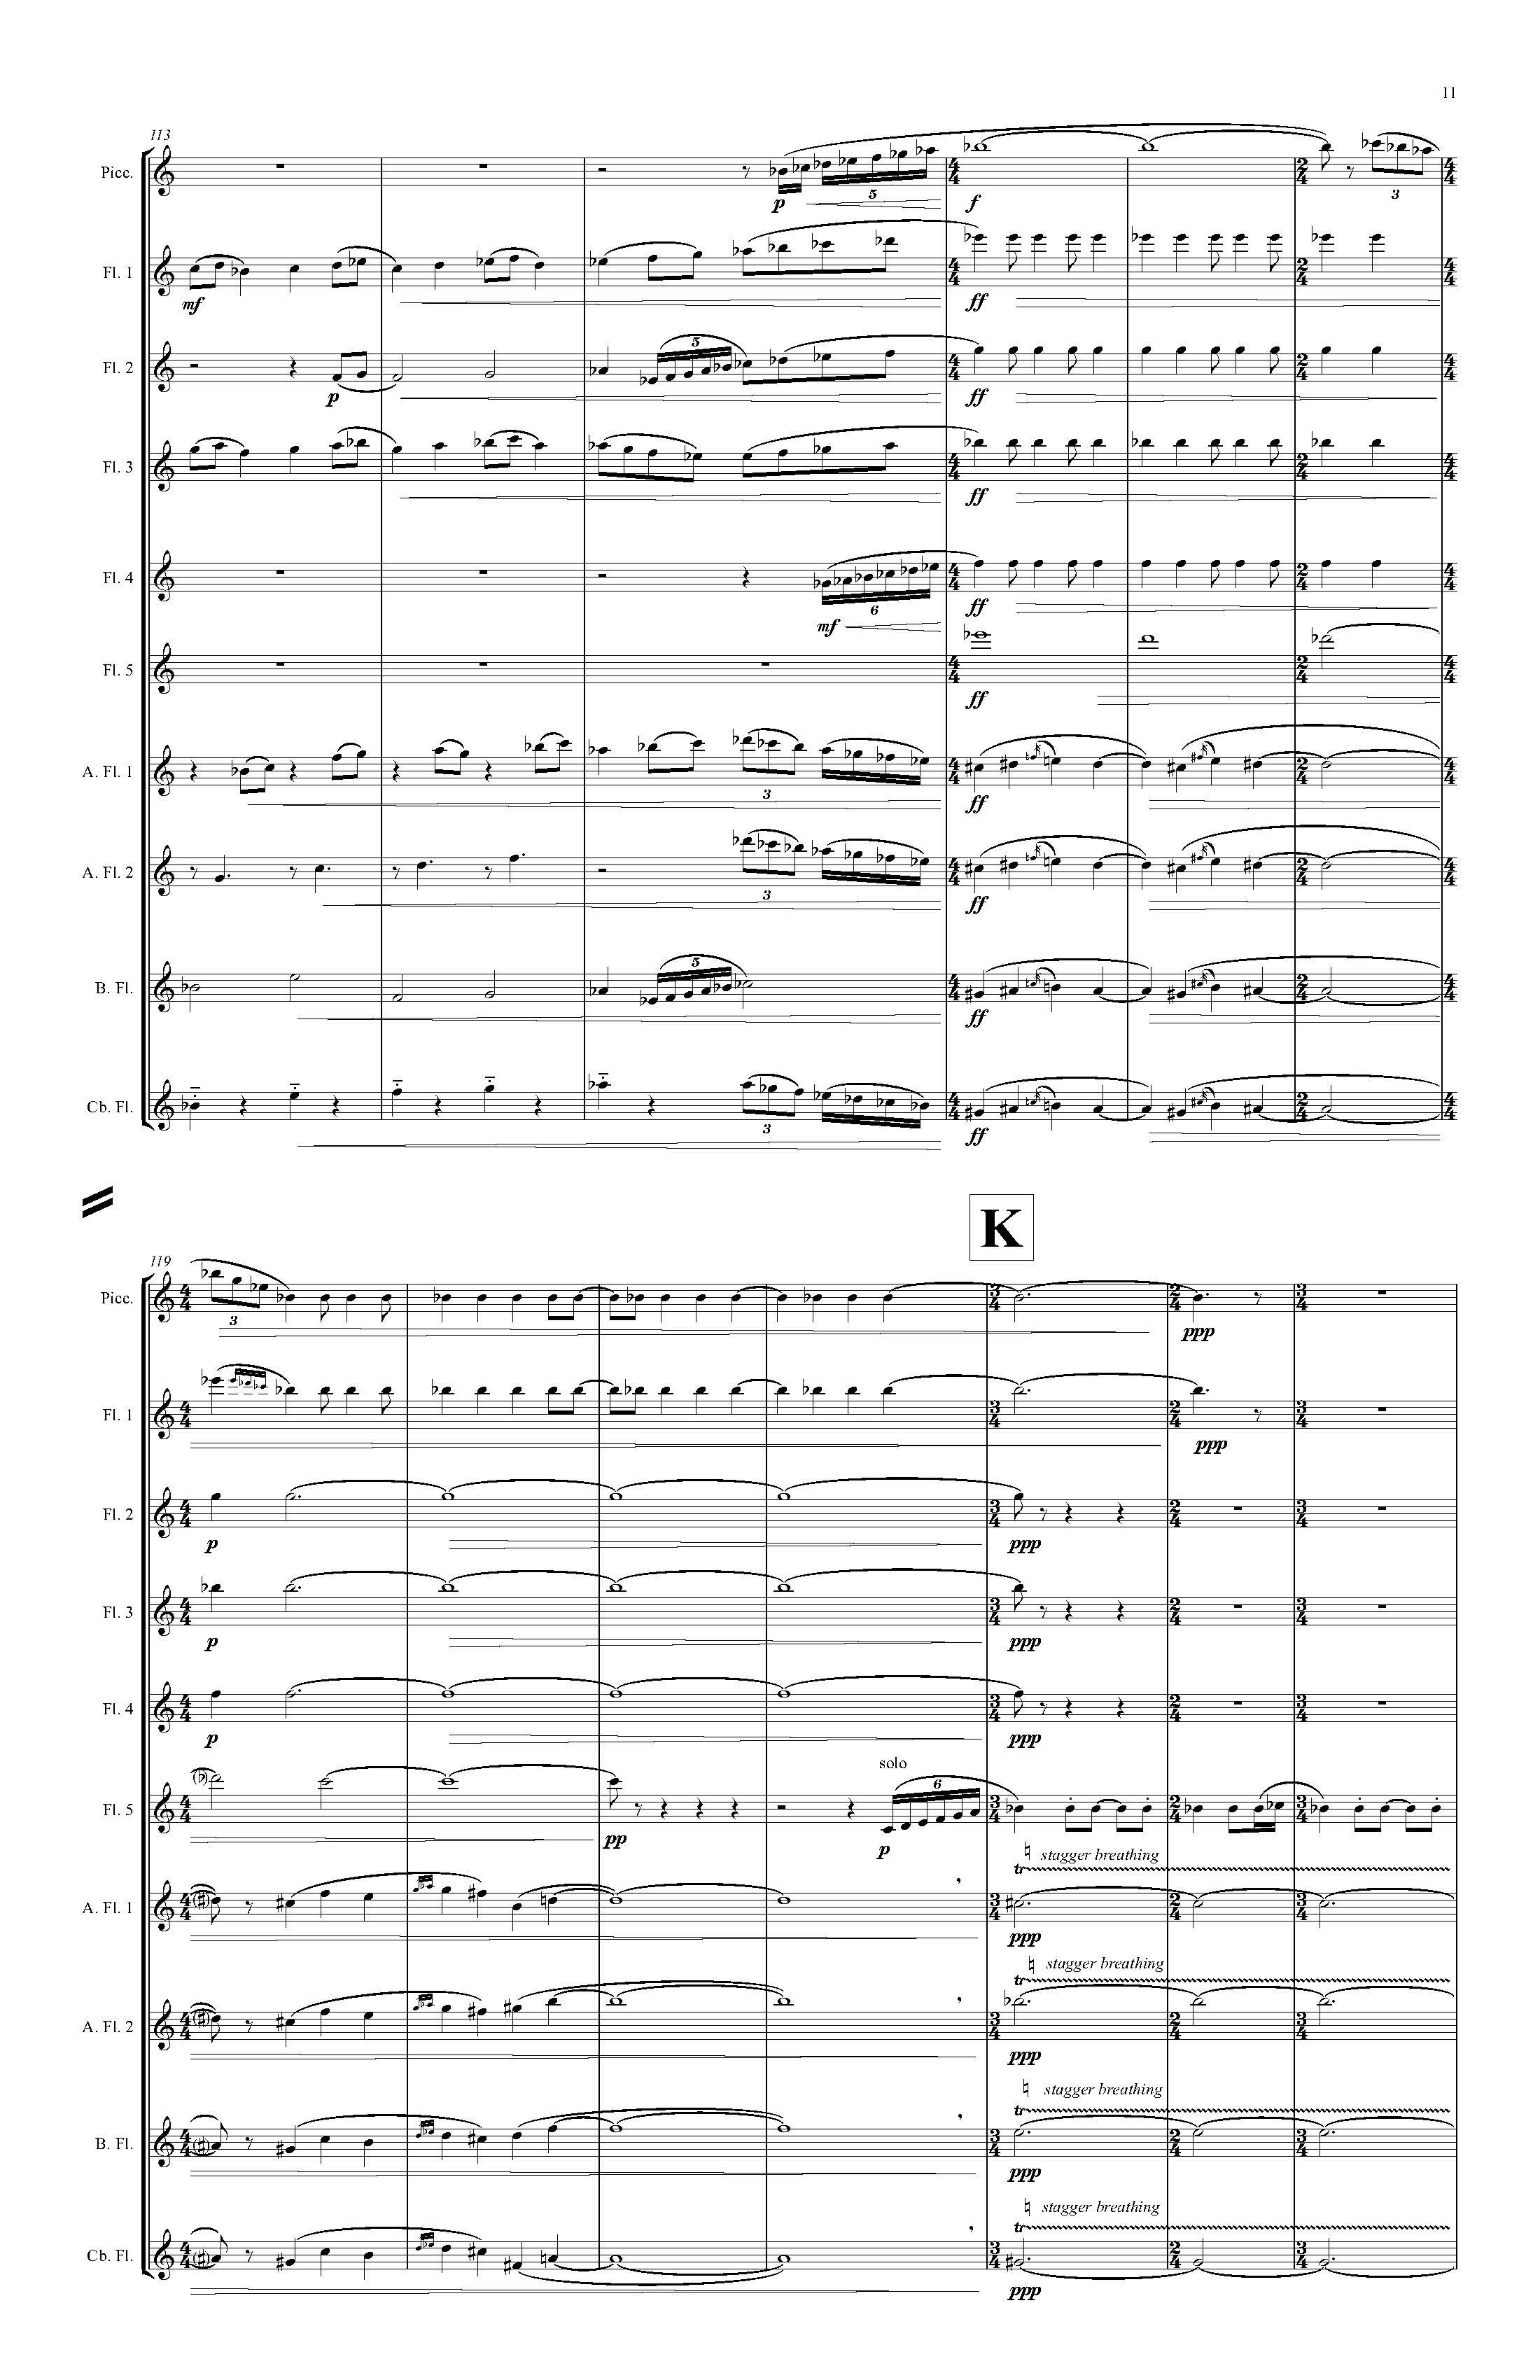 PIPES - Complete Score_Page_17.jpg